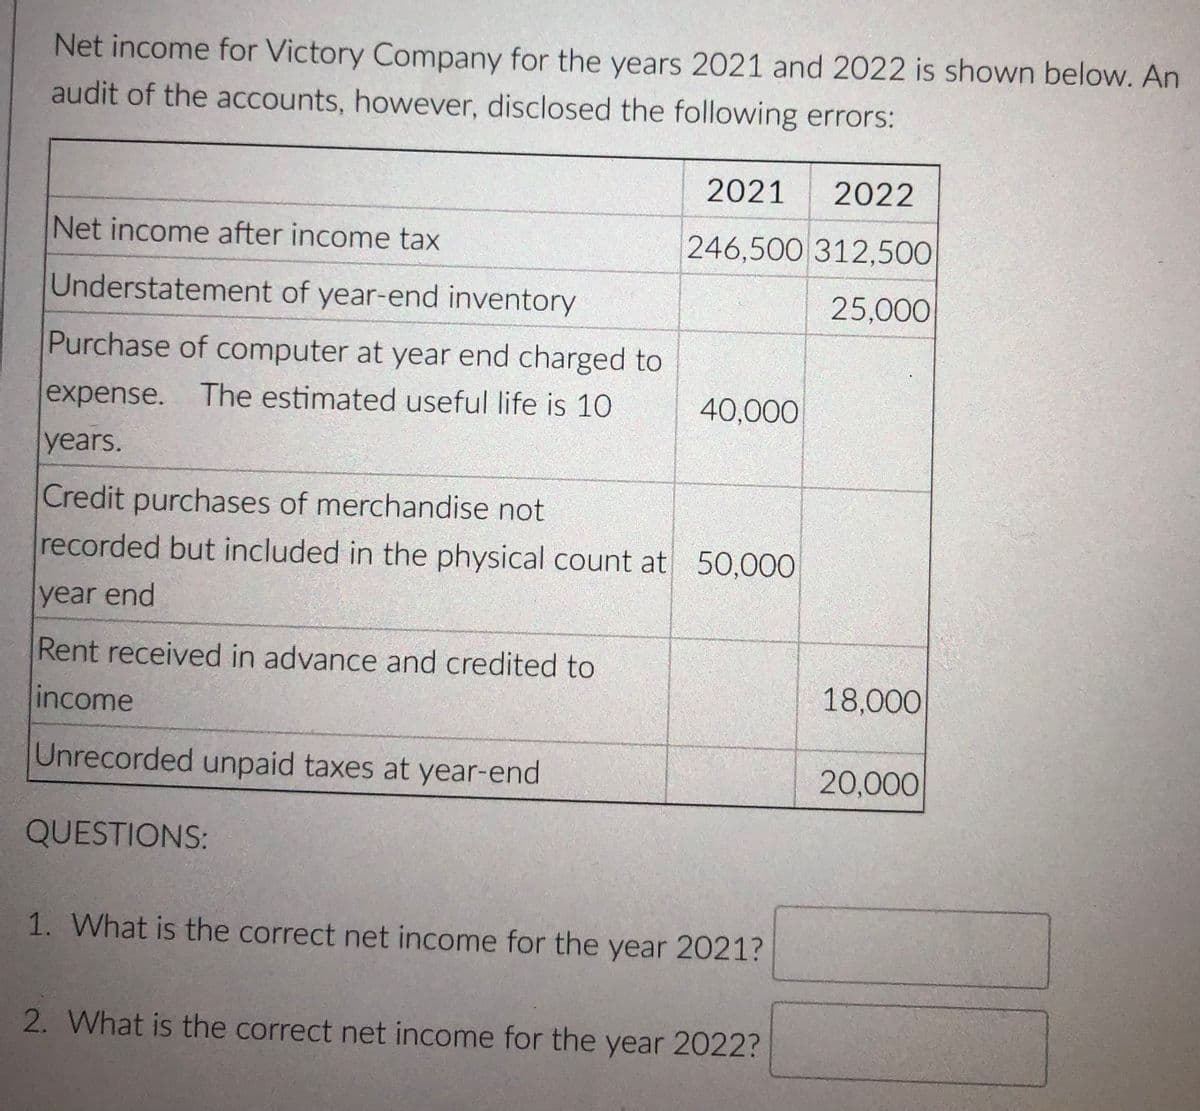 Net income for Victory Company for the years 2021 and 2022 is shown below. An
audit of the accounts, however, disclosed the following errors:
2021
2022
Net income after income tax
246,500 312,500
Understatement of year-end inventory
25,000
Purchase of computer at year end charged to
expense. The estimated useful life is 10
40,000
years.
Credit purchases of merchandise not
recorded but included in the physical count at 50,000
year end
Rent received in advance and credited to
income
18,000
Unrecorded unpaid taxes at year-end
20,000
QUESTIONS:
1. What is the correct net income for the year 2021?
2. What is the correct net income for the year 2022?
